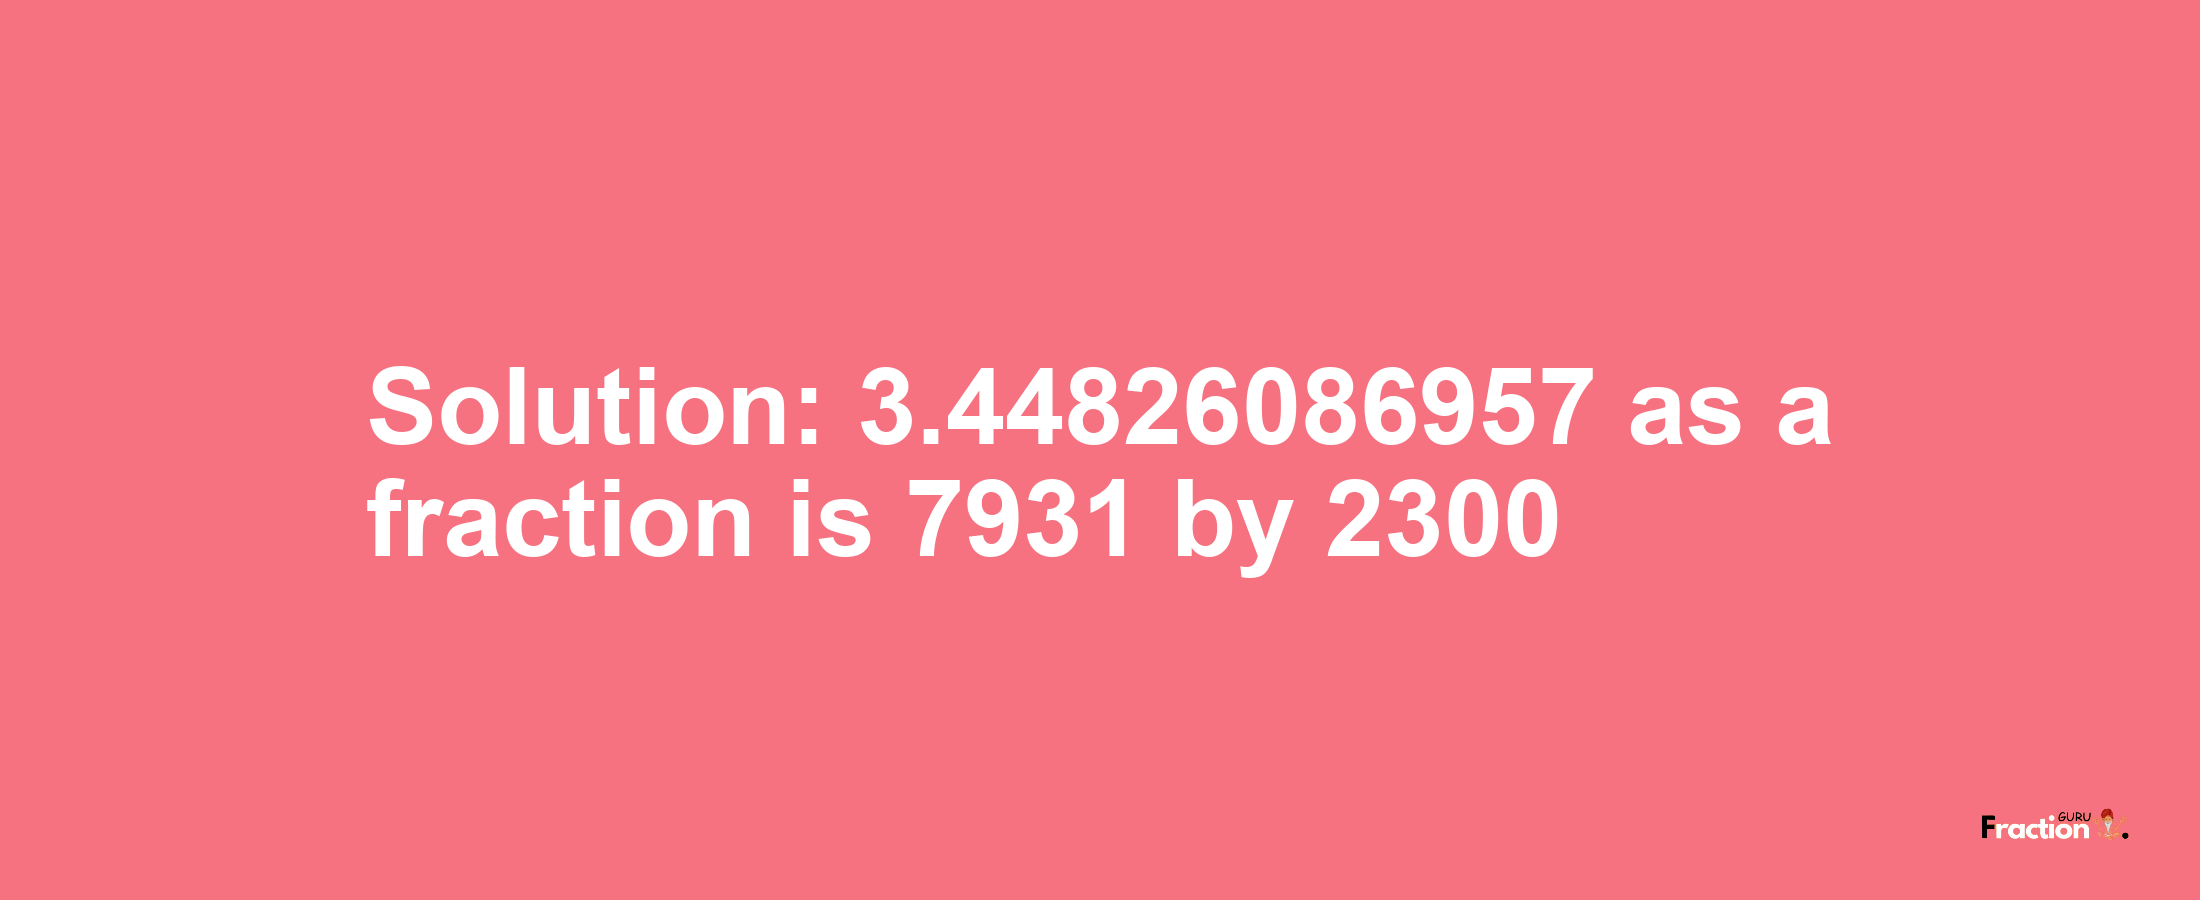 Solution:3.44826086957 as a fraction is 7931/2300